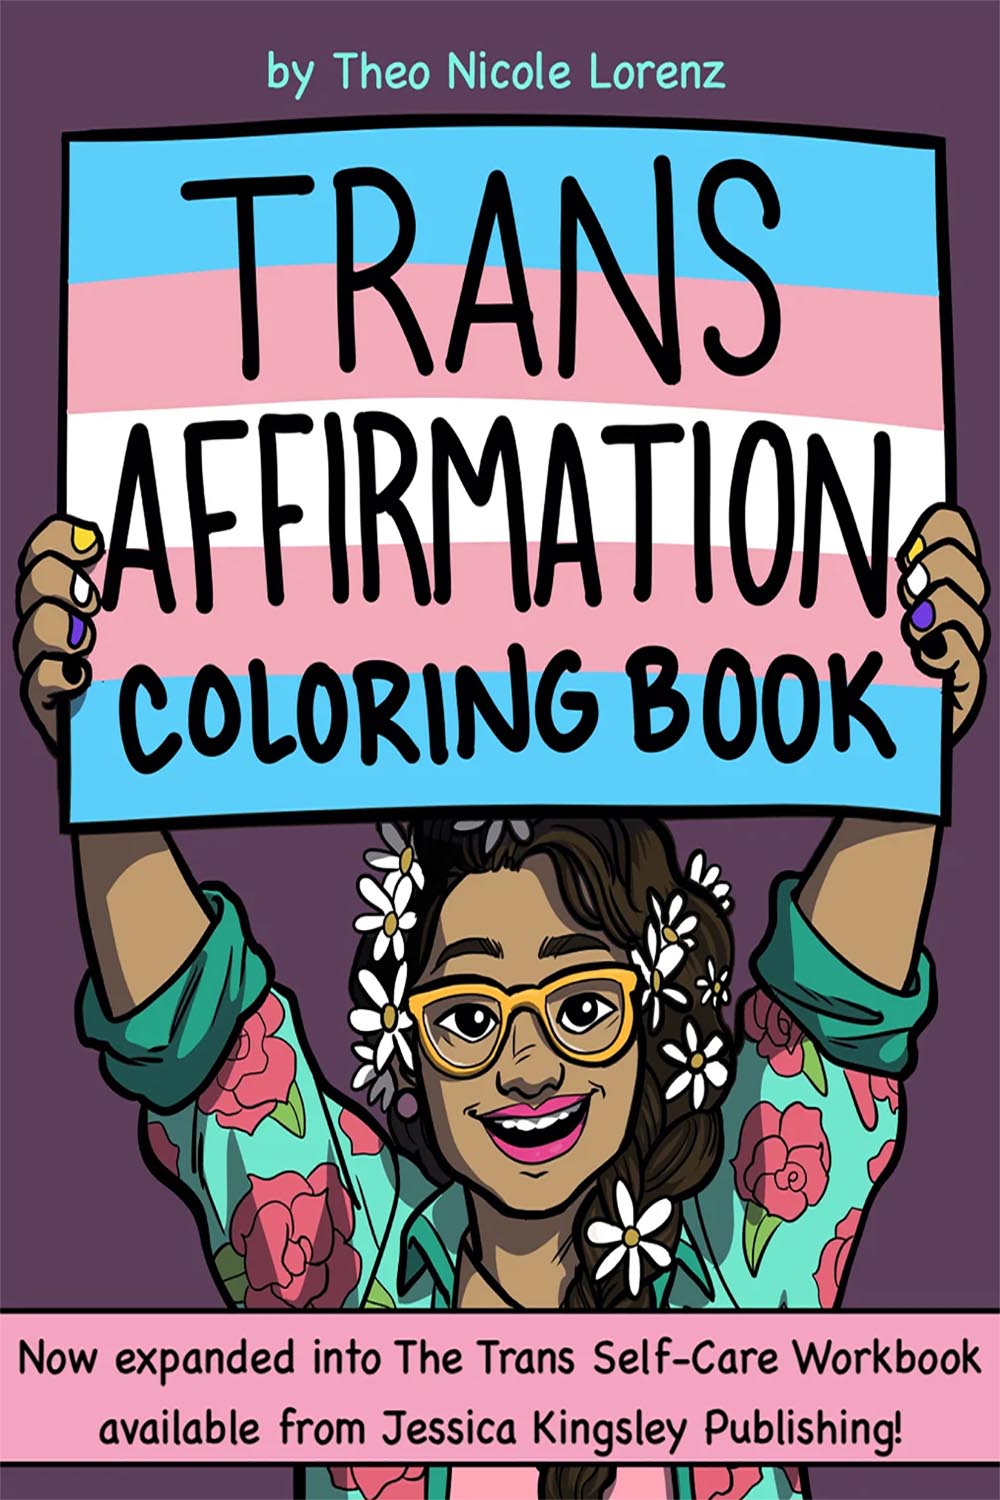 The Trans Affirmation Coloring Book pinterest preview image.